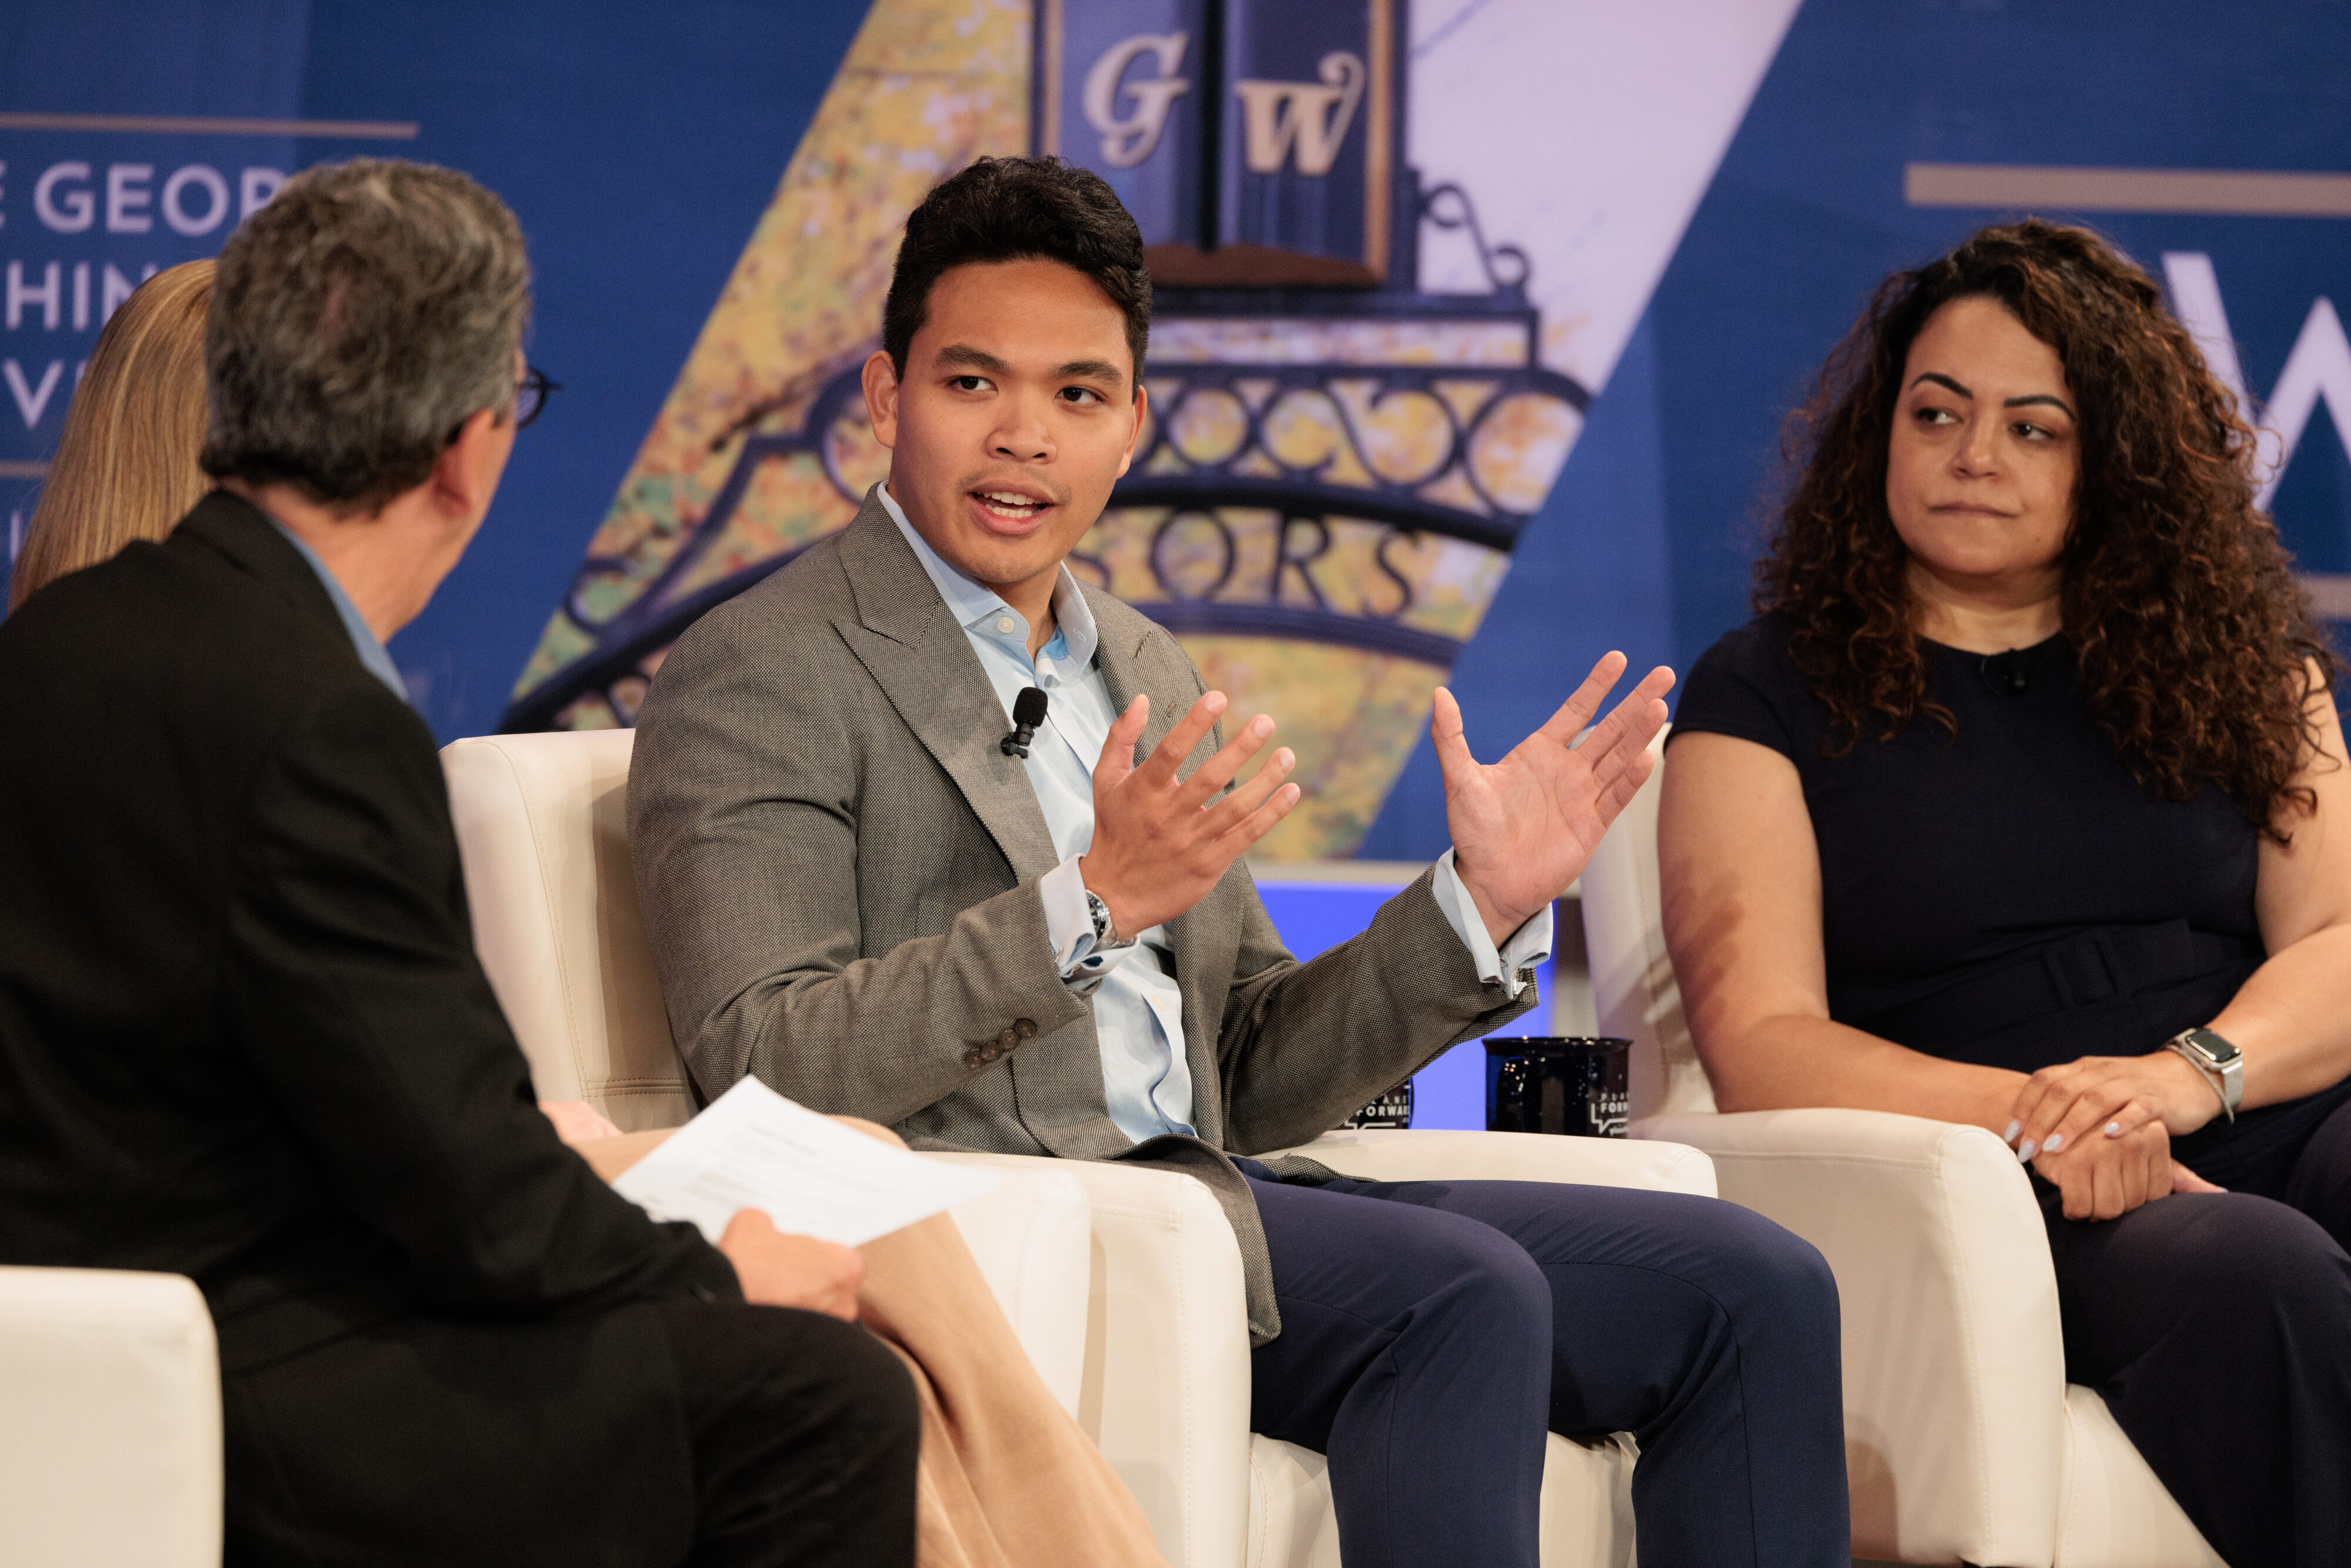 (From left to right) Joshua Panganiban, Renewables Lead Project Manager, NextEra Energy Resources; and Artealia Gilliard, Environmental Leadership & Sustainability Communications & Advocacy, Ford Motor Company; discuss corporate responsibility to sustainability. 